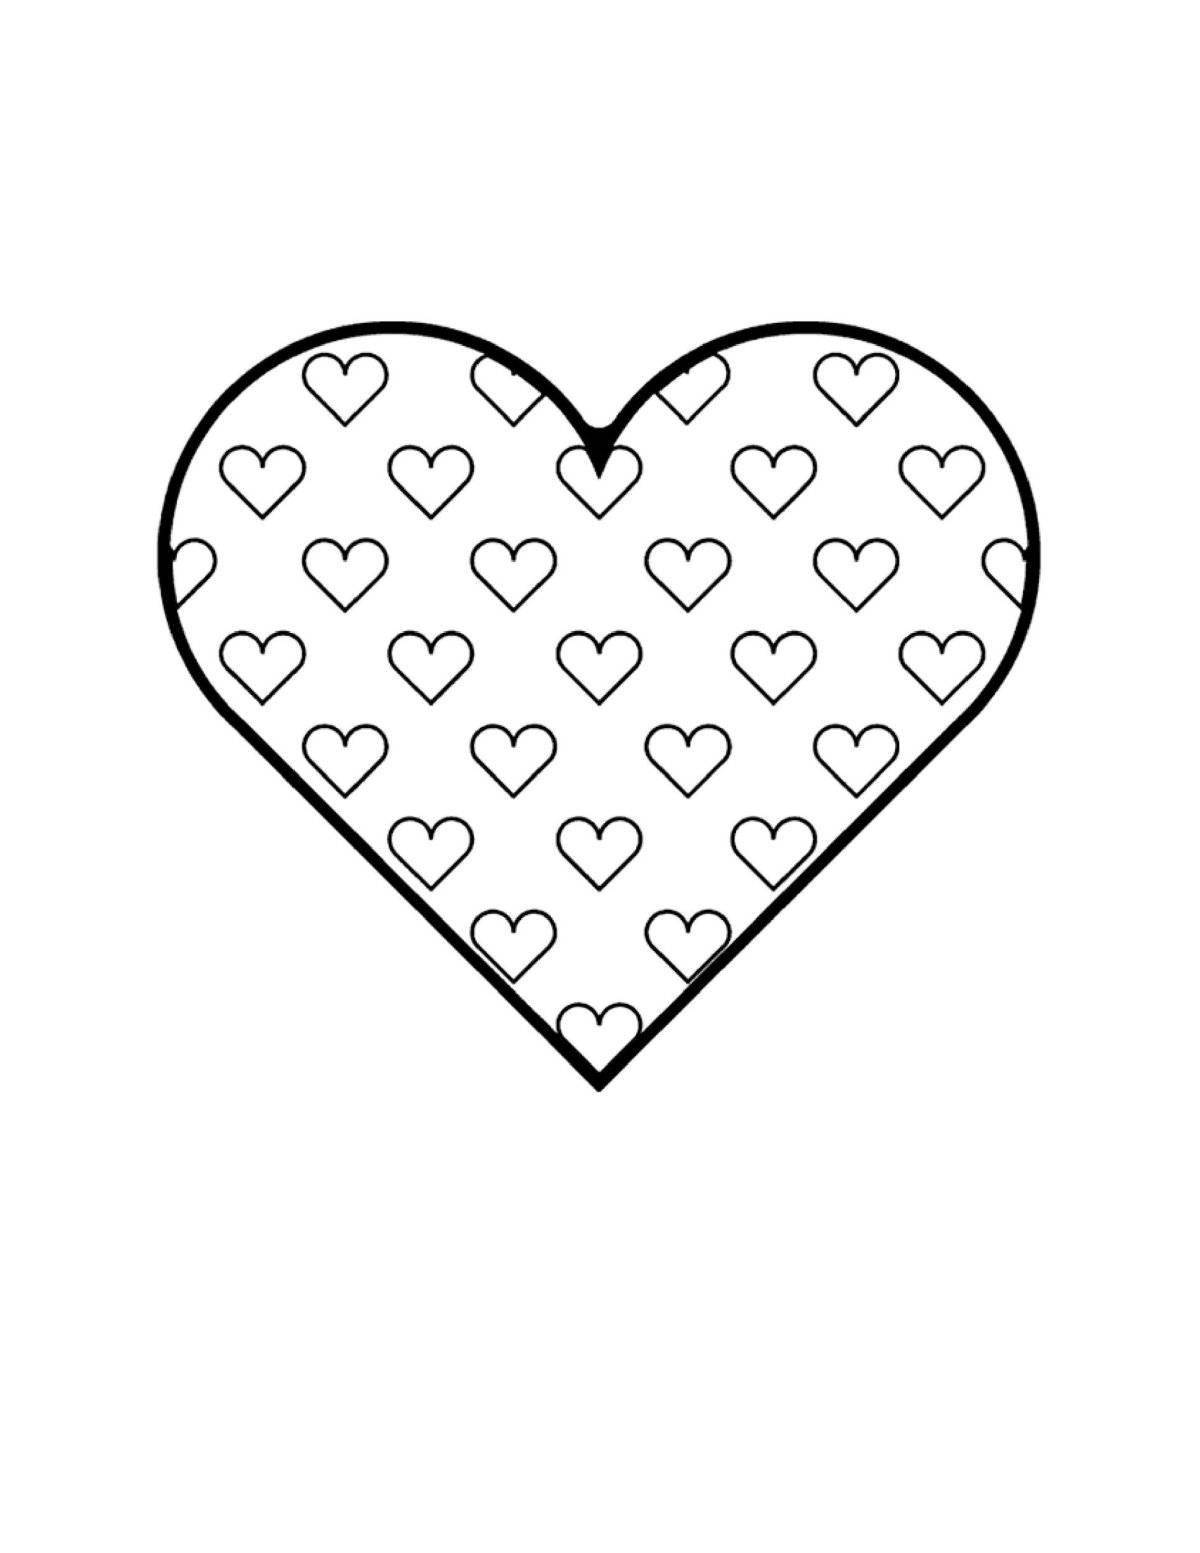 Glorious rainbow heart coloring page